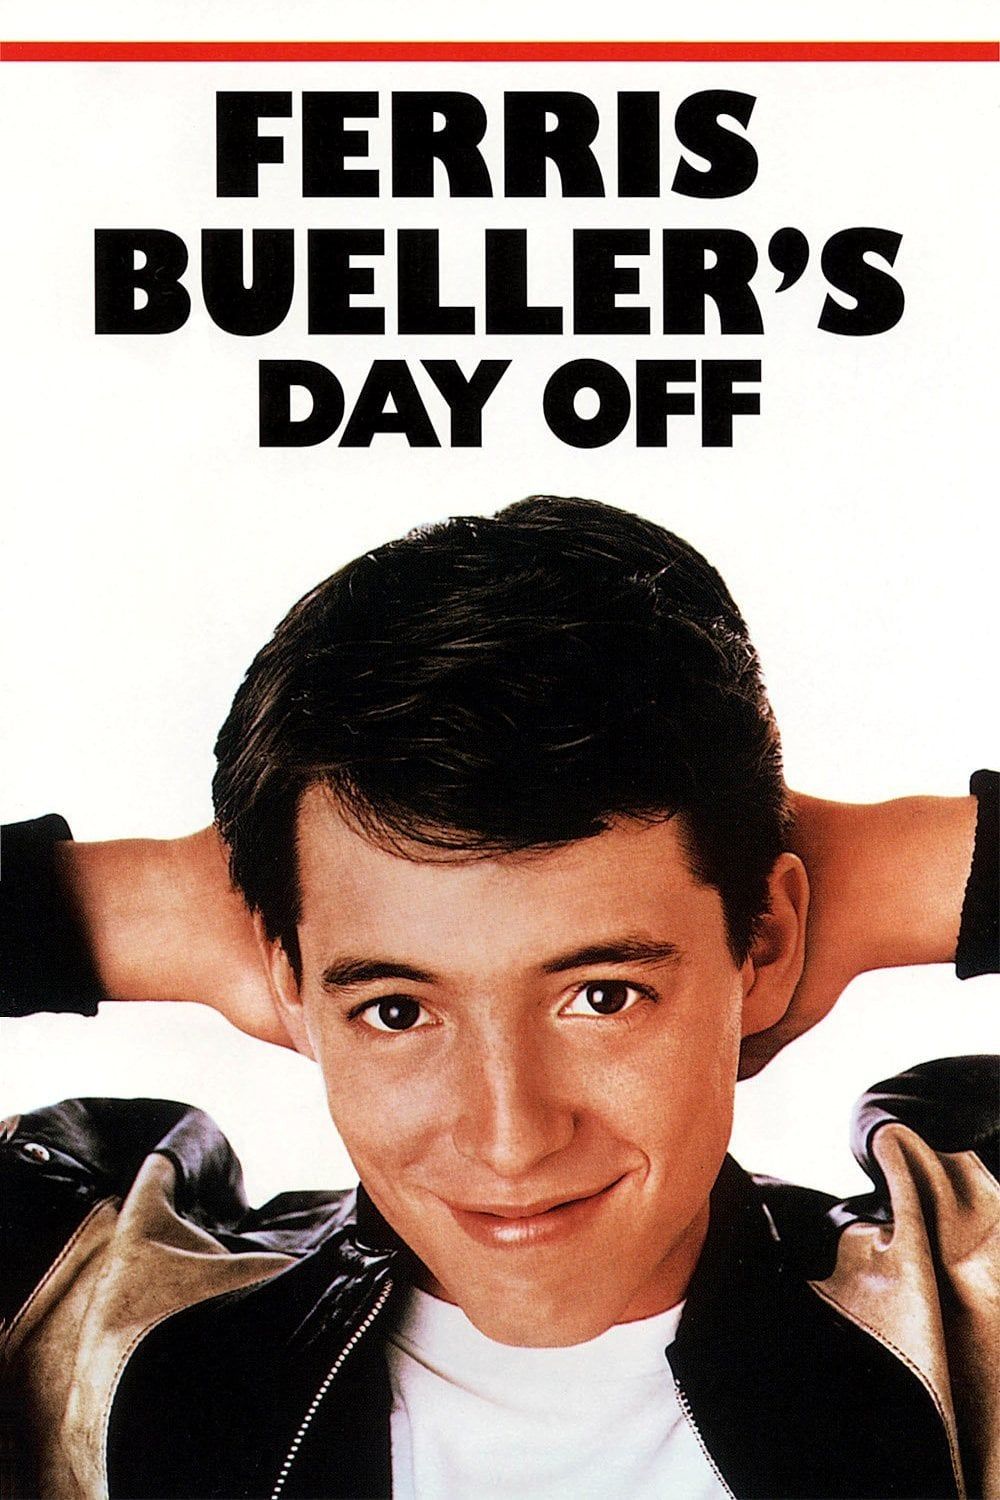 Direct Quotes From My Kids While Watching Ferris Bueller's Day Off - The  Good Men Project